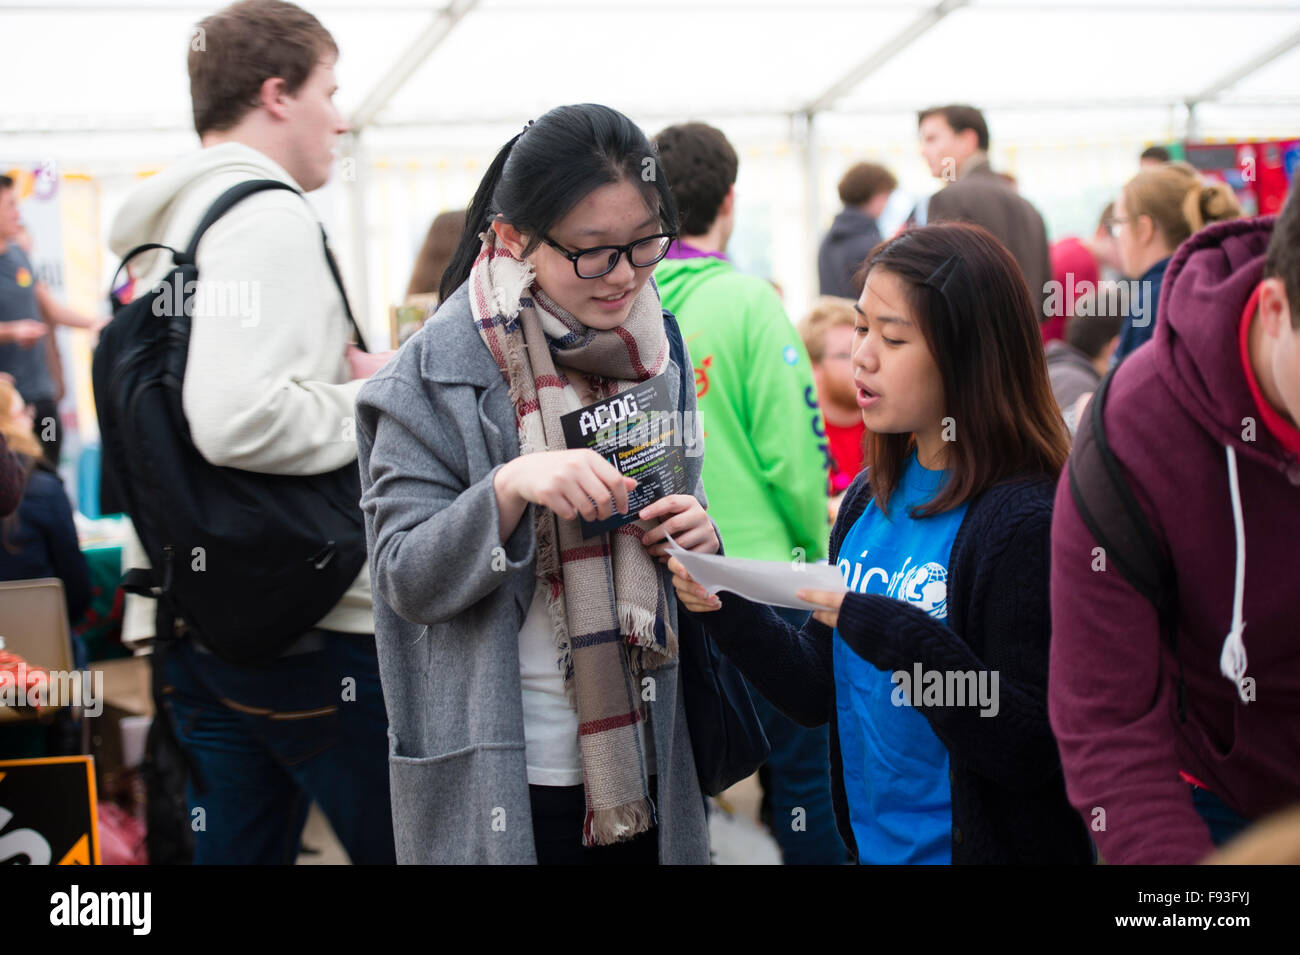 Freshers Week at University UK: Two young Chinese women, Aberystwyth university undergraduate overseas students,  signing up to join social and community groups and  societies at the Freshers Fair in the opening week of the academic year,September 2015,, Wales UK Stock Photo